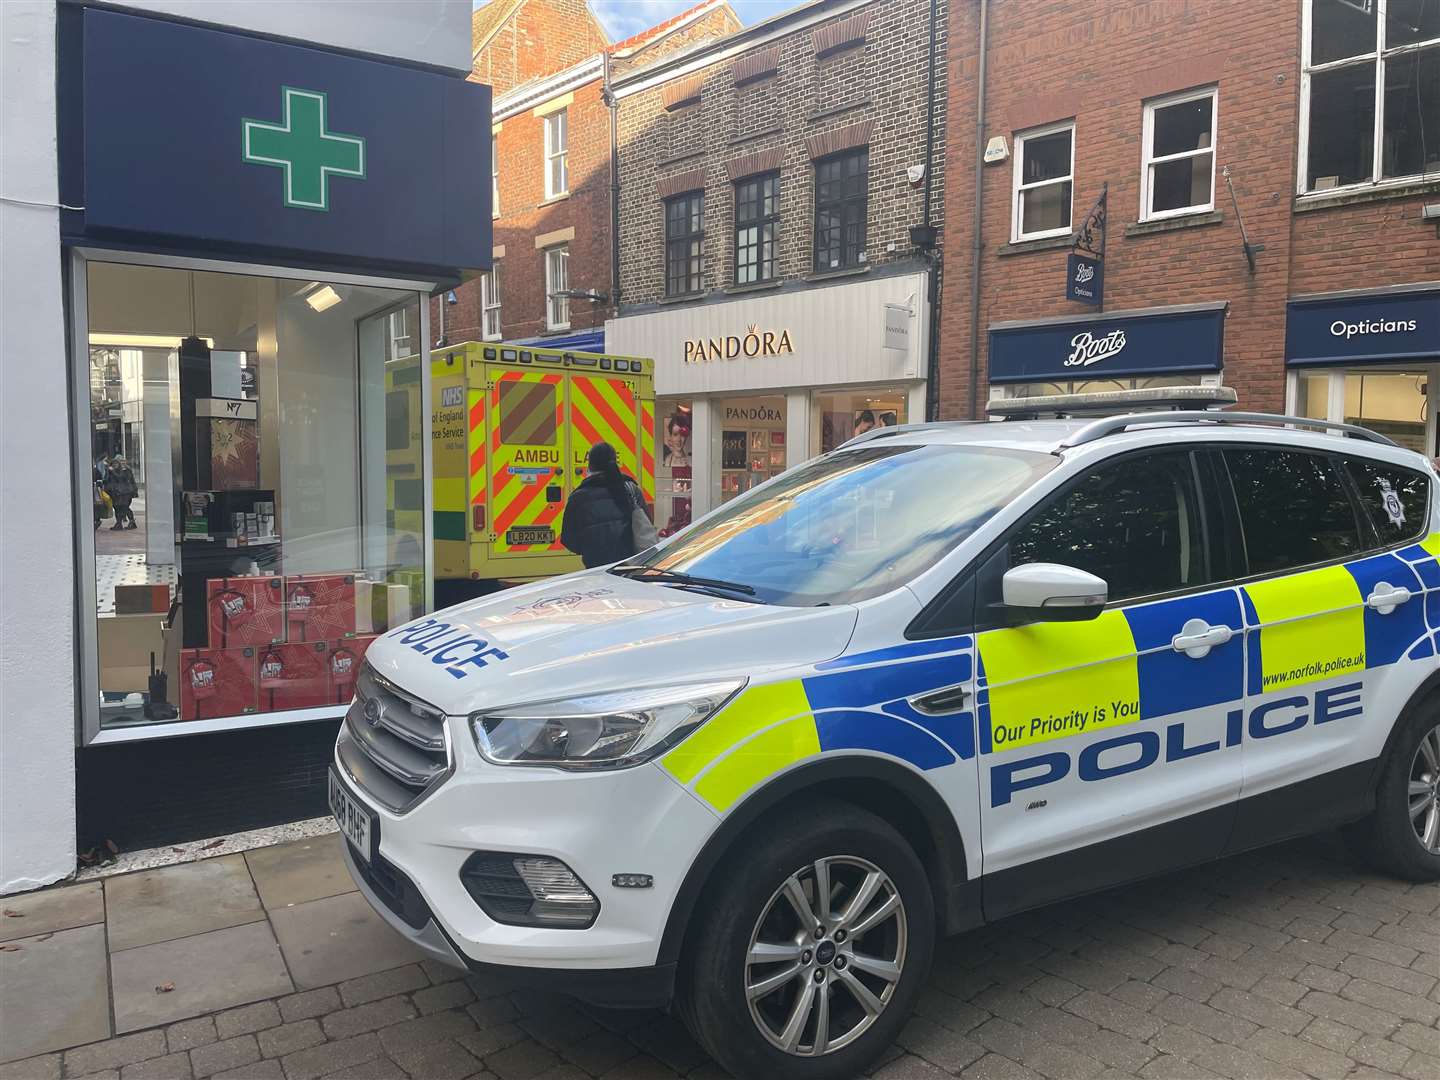 Police and ambulance were called to High Street in Lynn to assist with a medical emergency